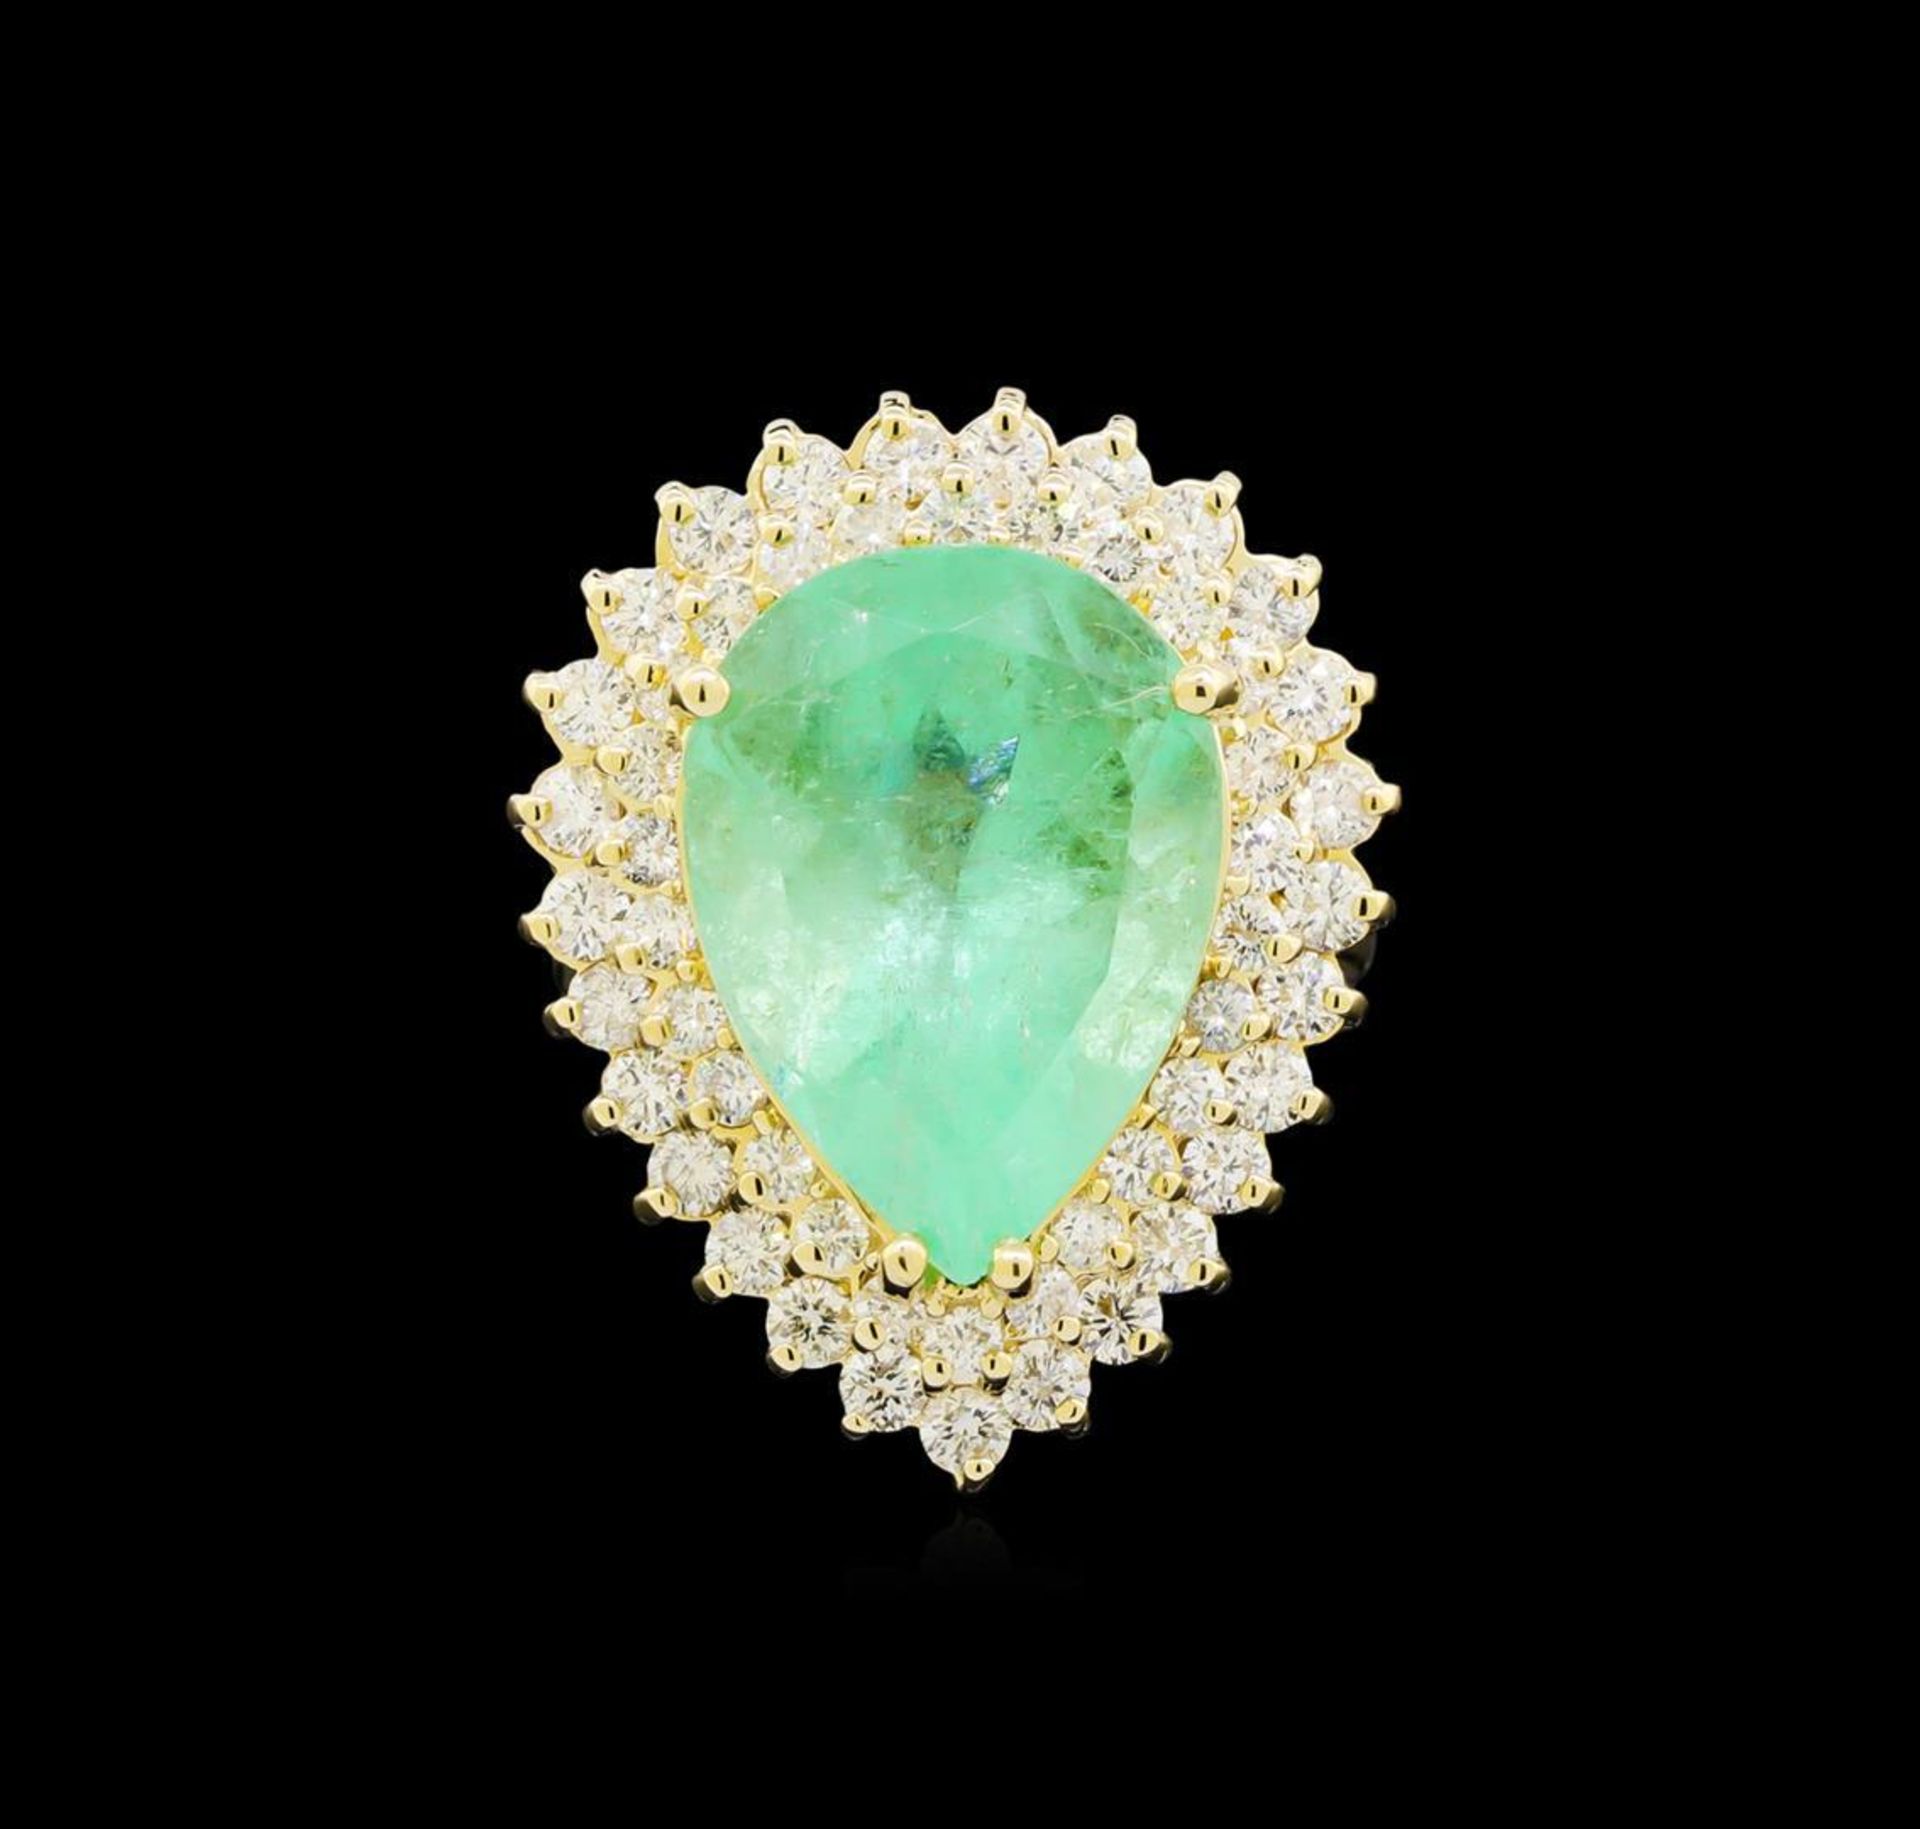 GIA Cert 9.78 ctw Emerald and Diamond Ring - 14KT Yellow Gold - Image 2 of 6